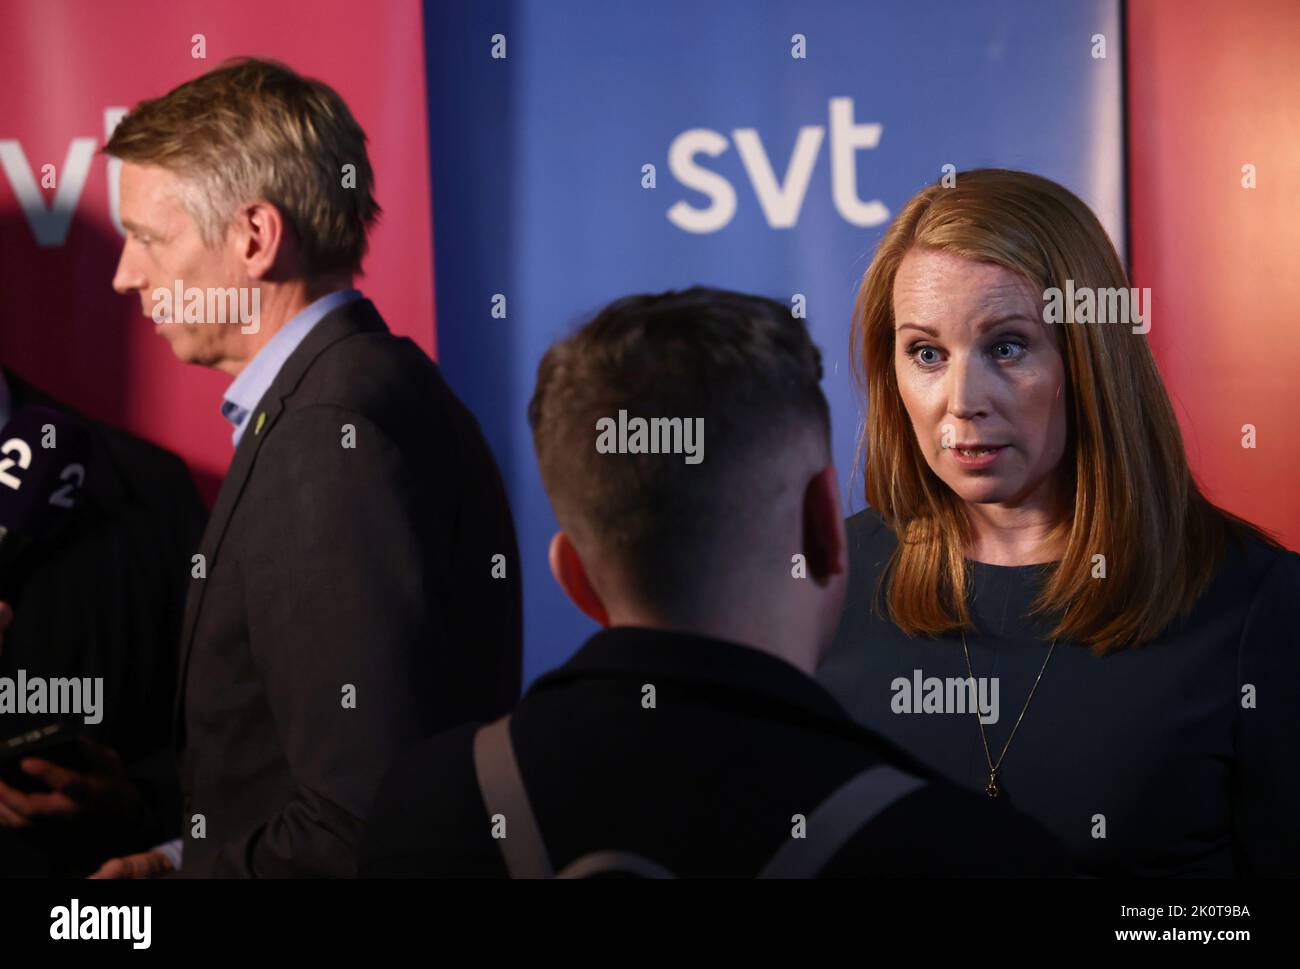 The Swedish parliamentary elections, election day, during Sunday in Stockholm, Sweden. In the picture: Sveriges Television's broadcast during election evening. In the picture to the right: Annie Lööf, The Centre Party (In swedish: centerpartiet). To the left: Per Bolund, The Green Party (Swedish: Miljöpartiet de gröna). Stock Photo